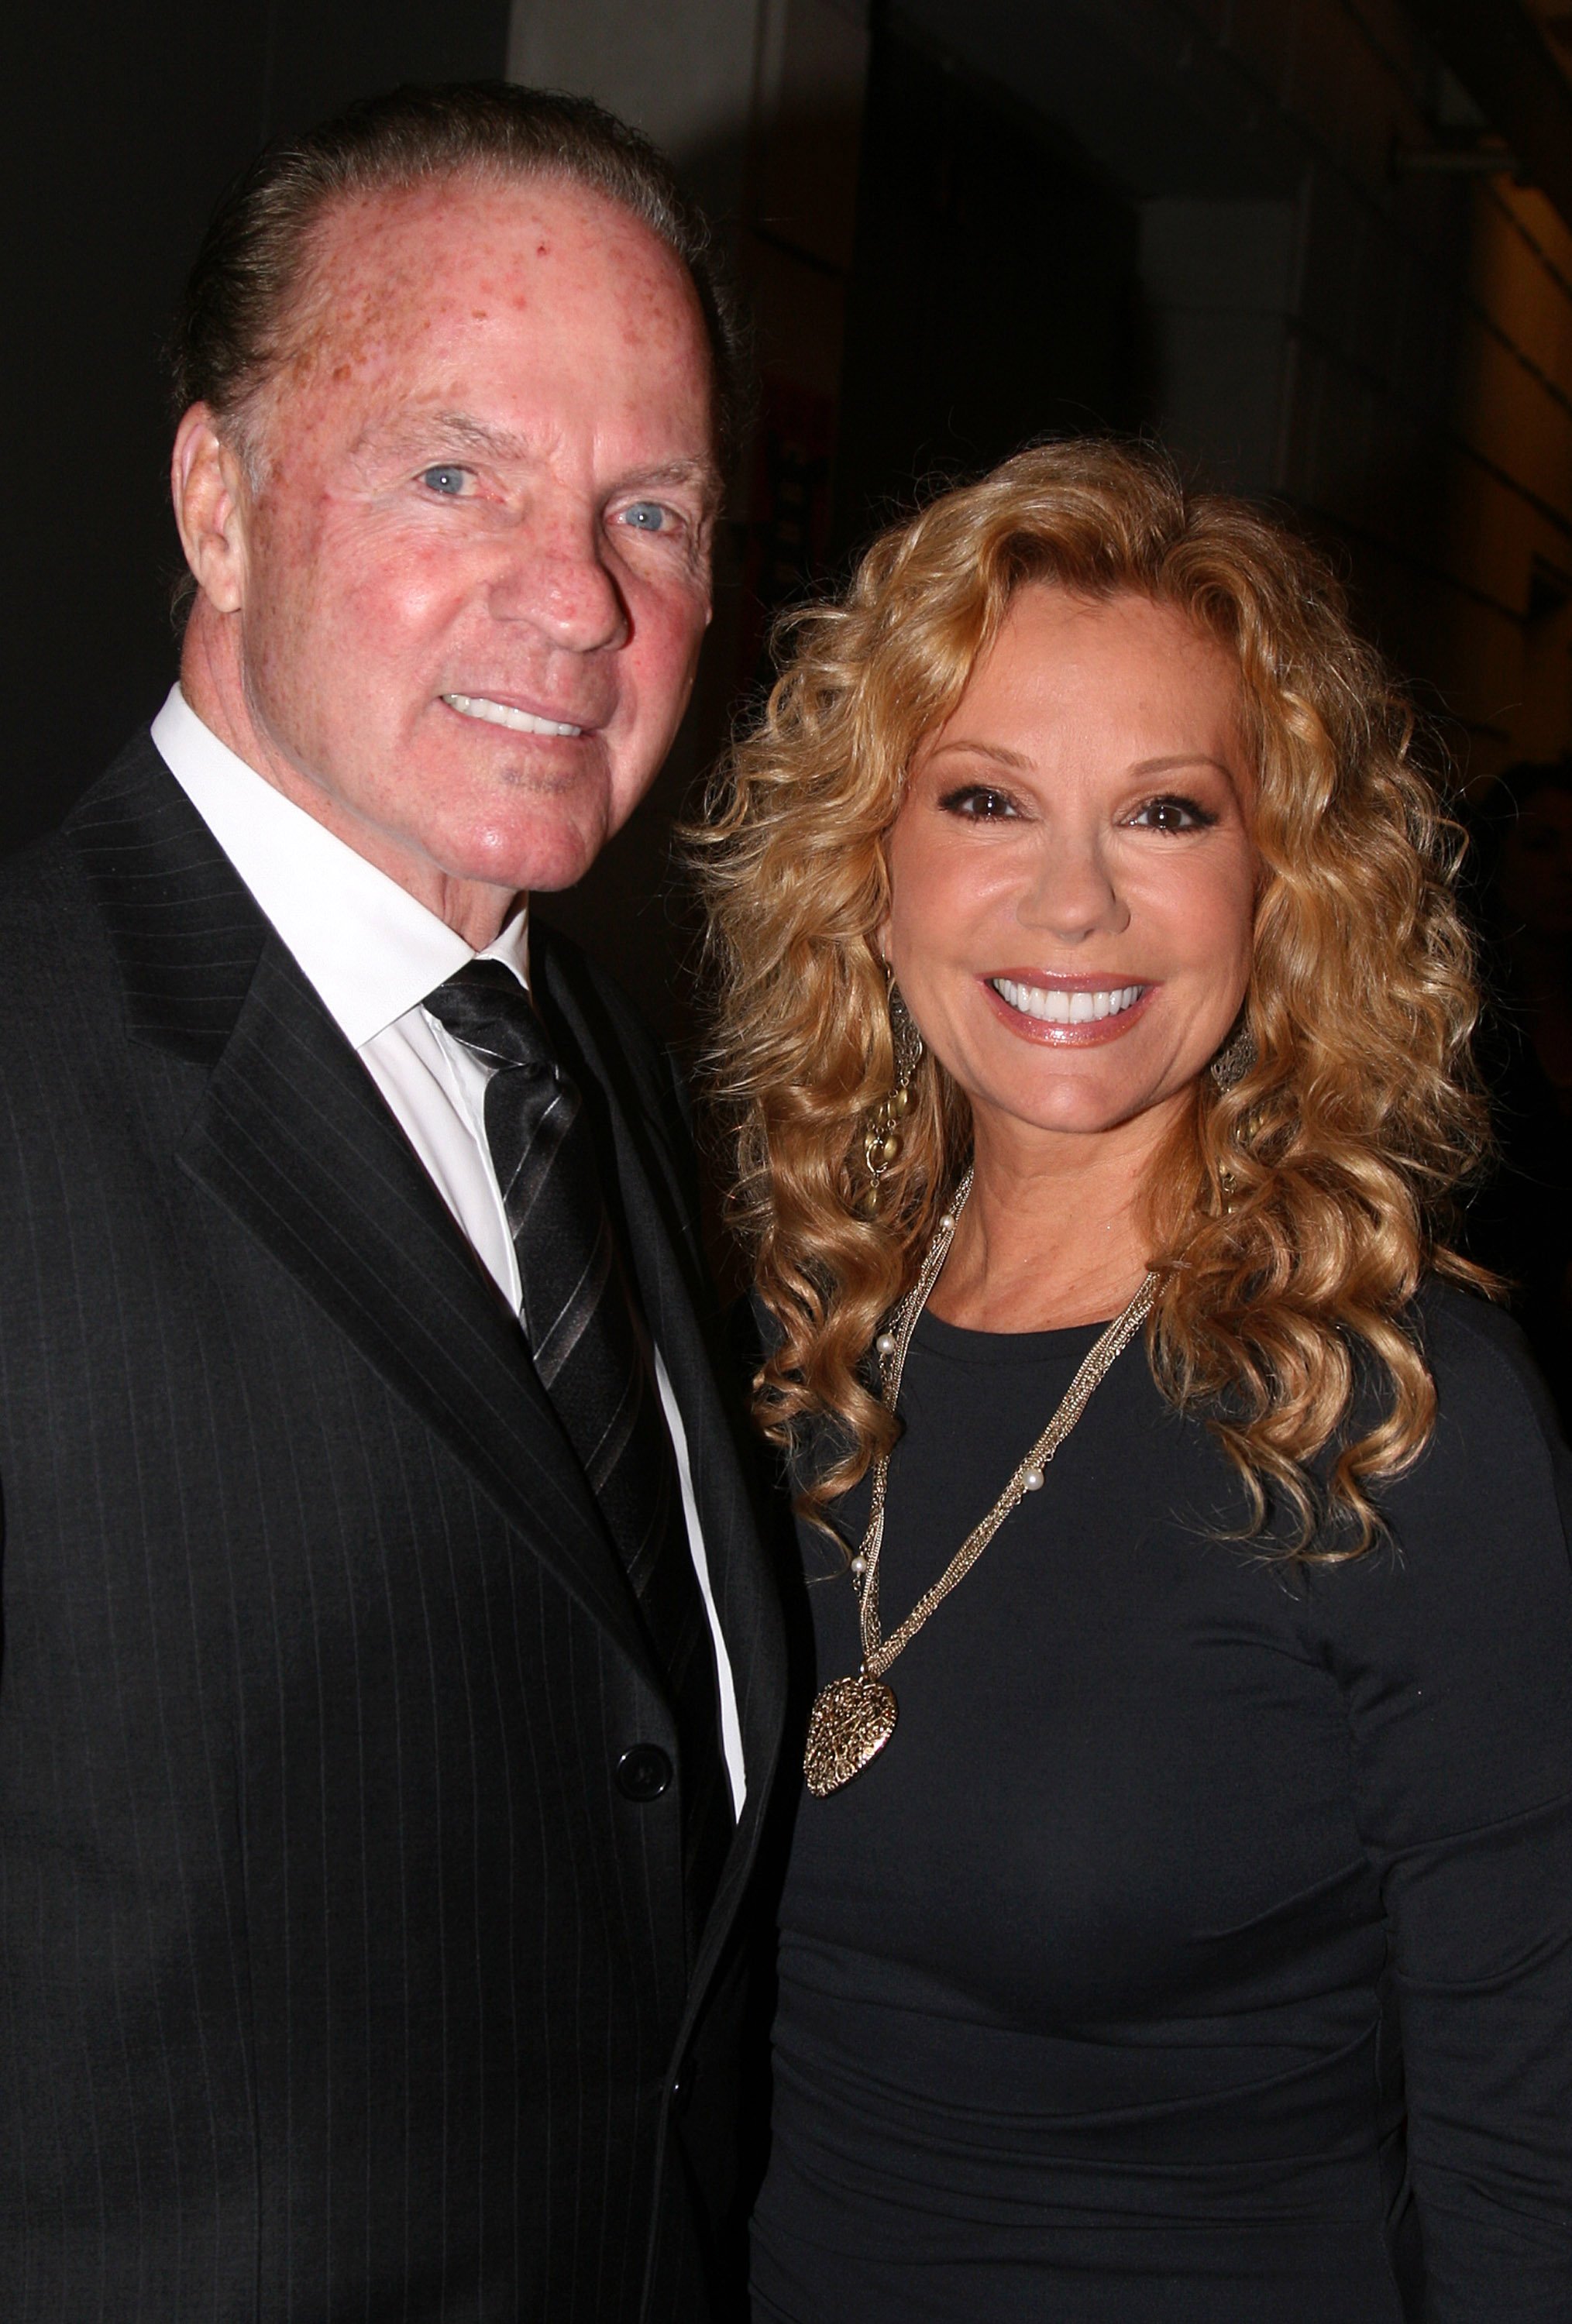 Frank Gifford and Kathie Lee Gifford attend the opening night of "Cyrano" on Broadway at The Richard Rodgers Theater November 1, 2007 in New York City. | Source: Getty Images